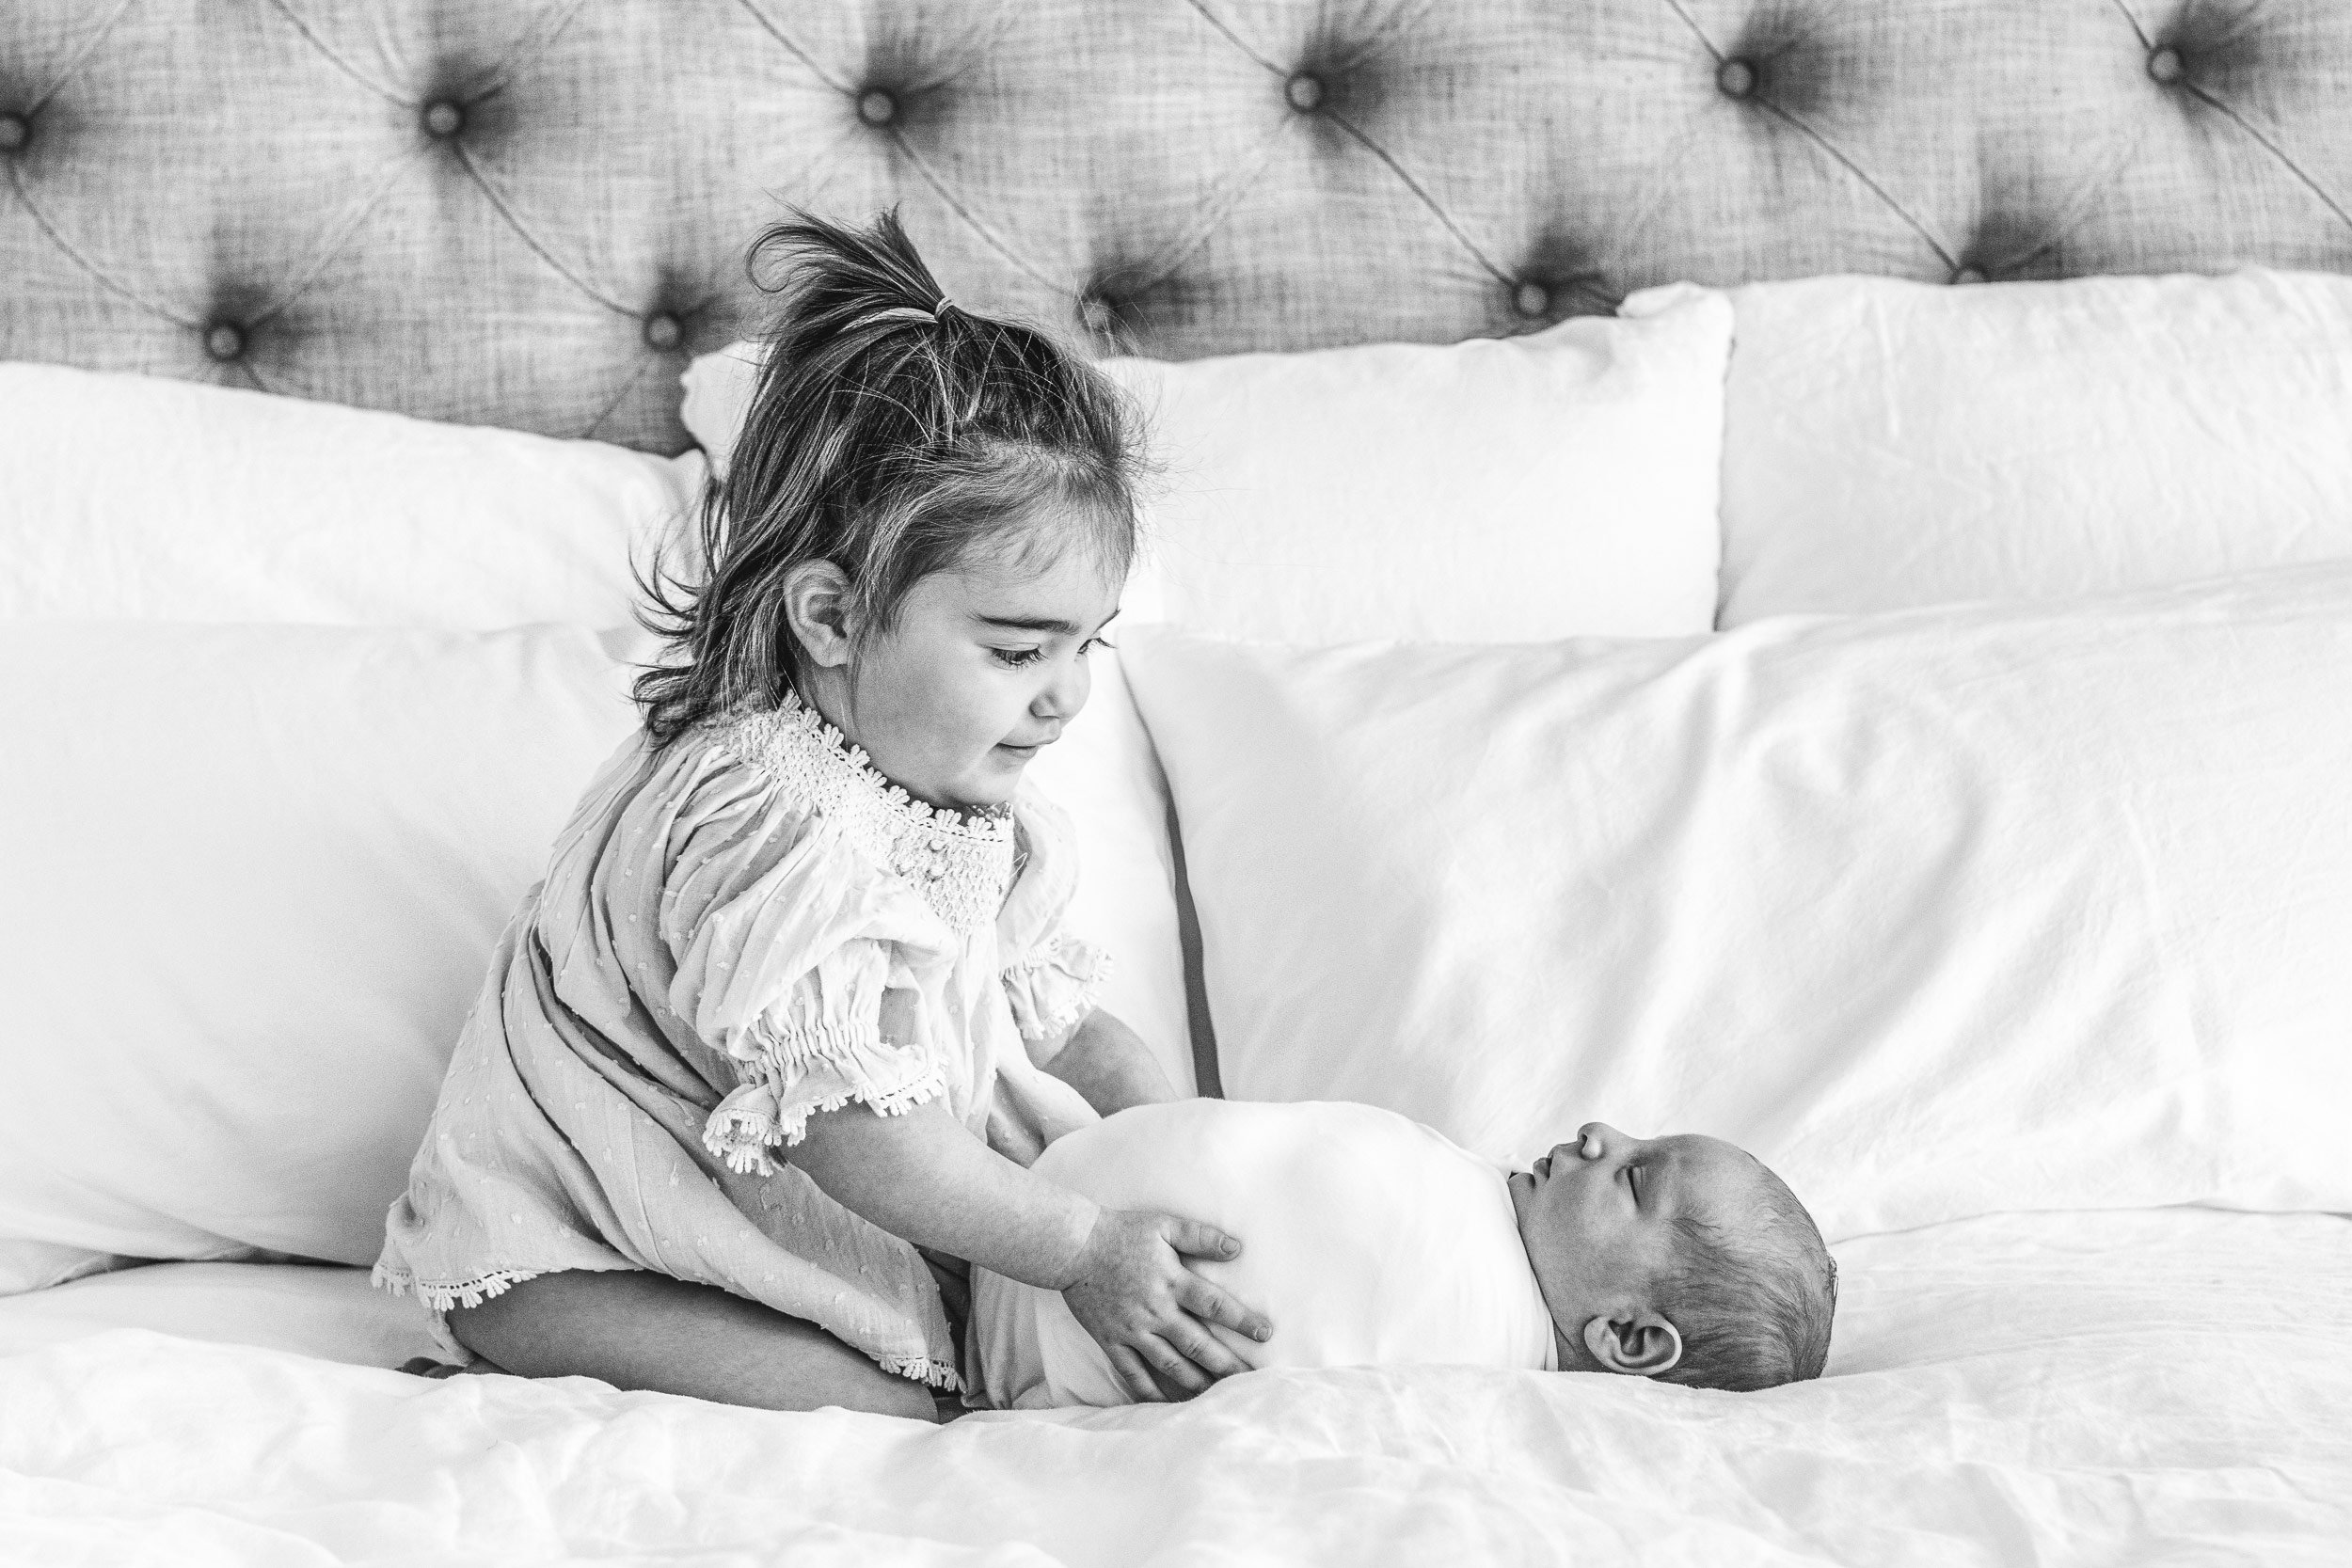  Nicole Hawkins Photography captures a stunning black and white portrait of two little siblings on a bed. baby and sister #NicoleHawkinsPhotography #InHomeNewborn #JerseyShoreNewborns #MontclairPhotographers #NewbornPhotography #baby #newborn 